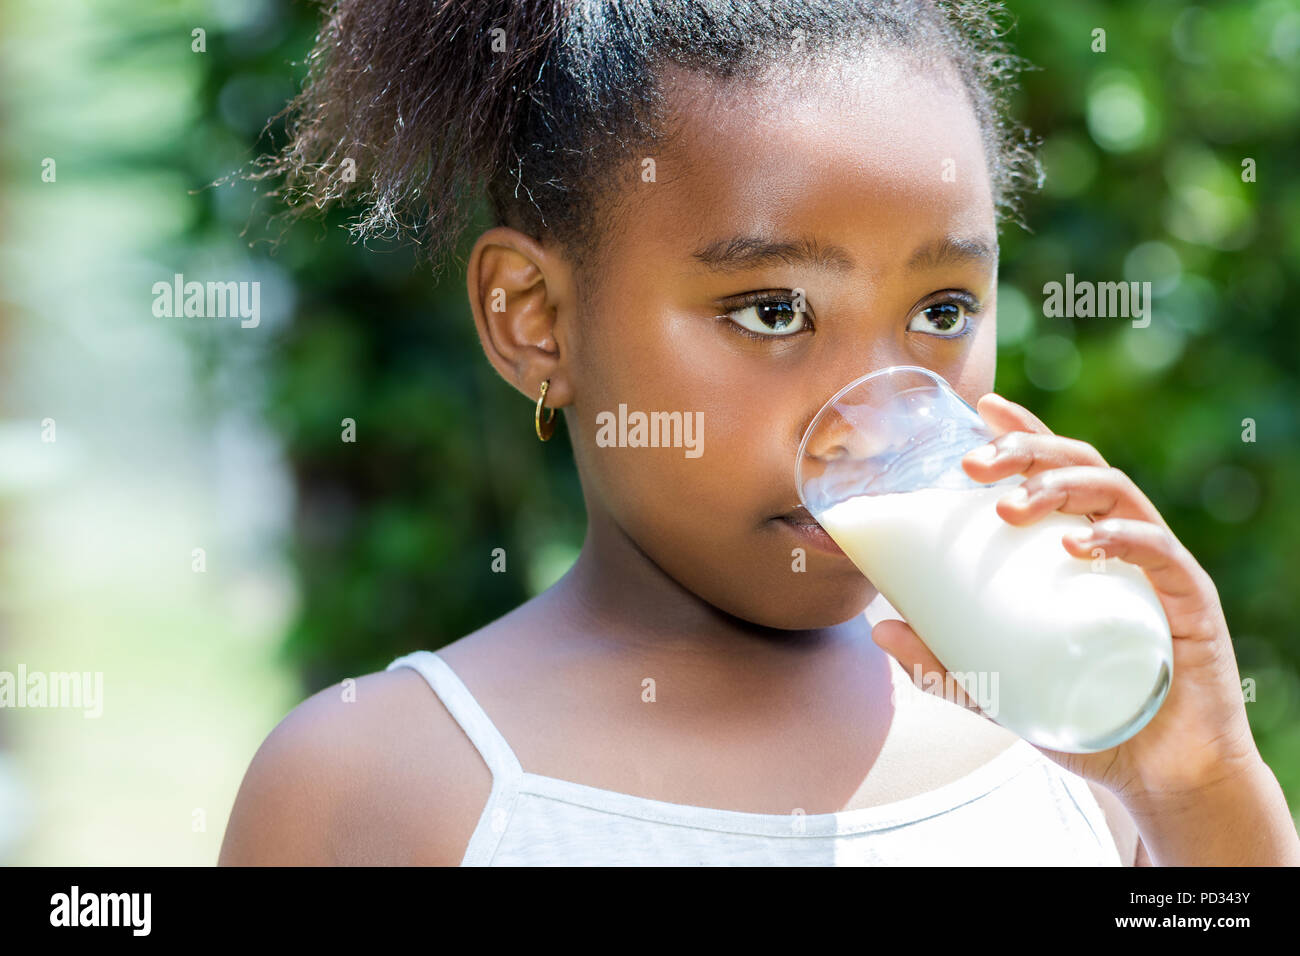 Close up portrait of cute little african girl drinking glass of milk in garden. Stock Photo